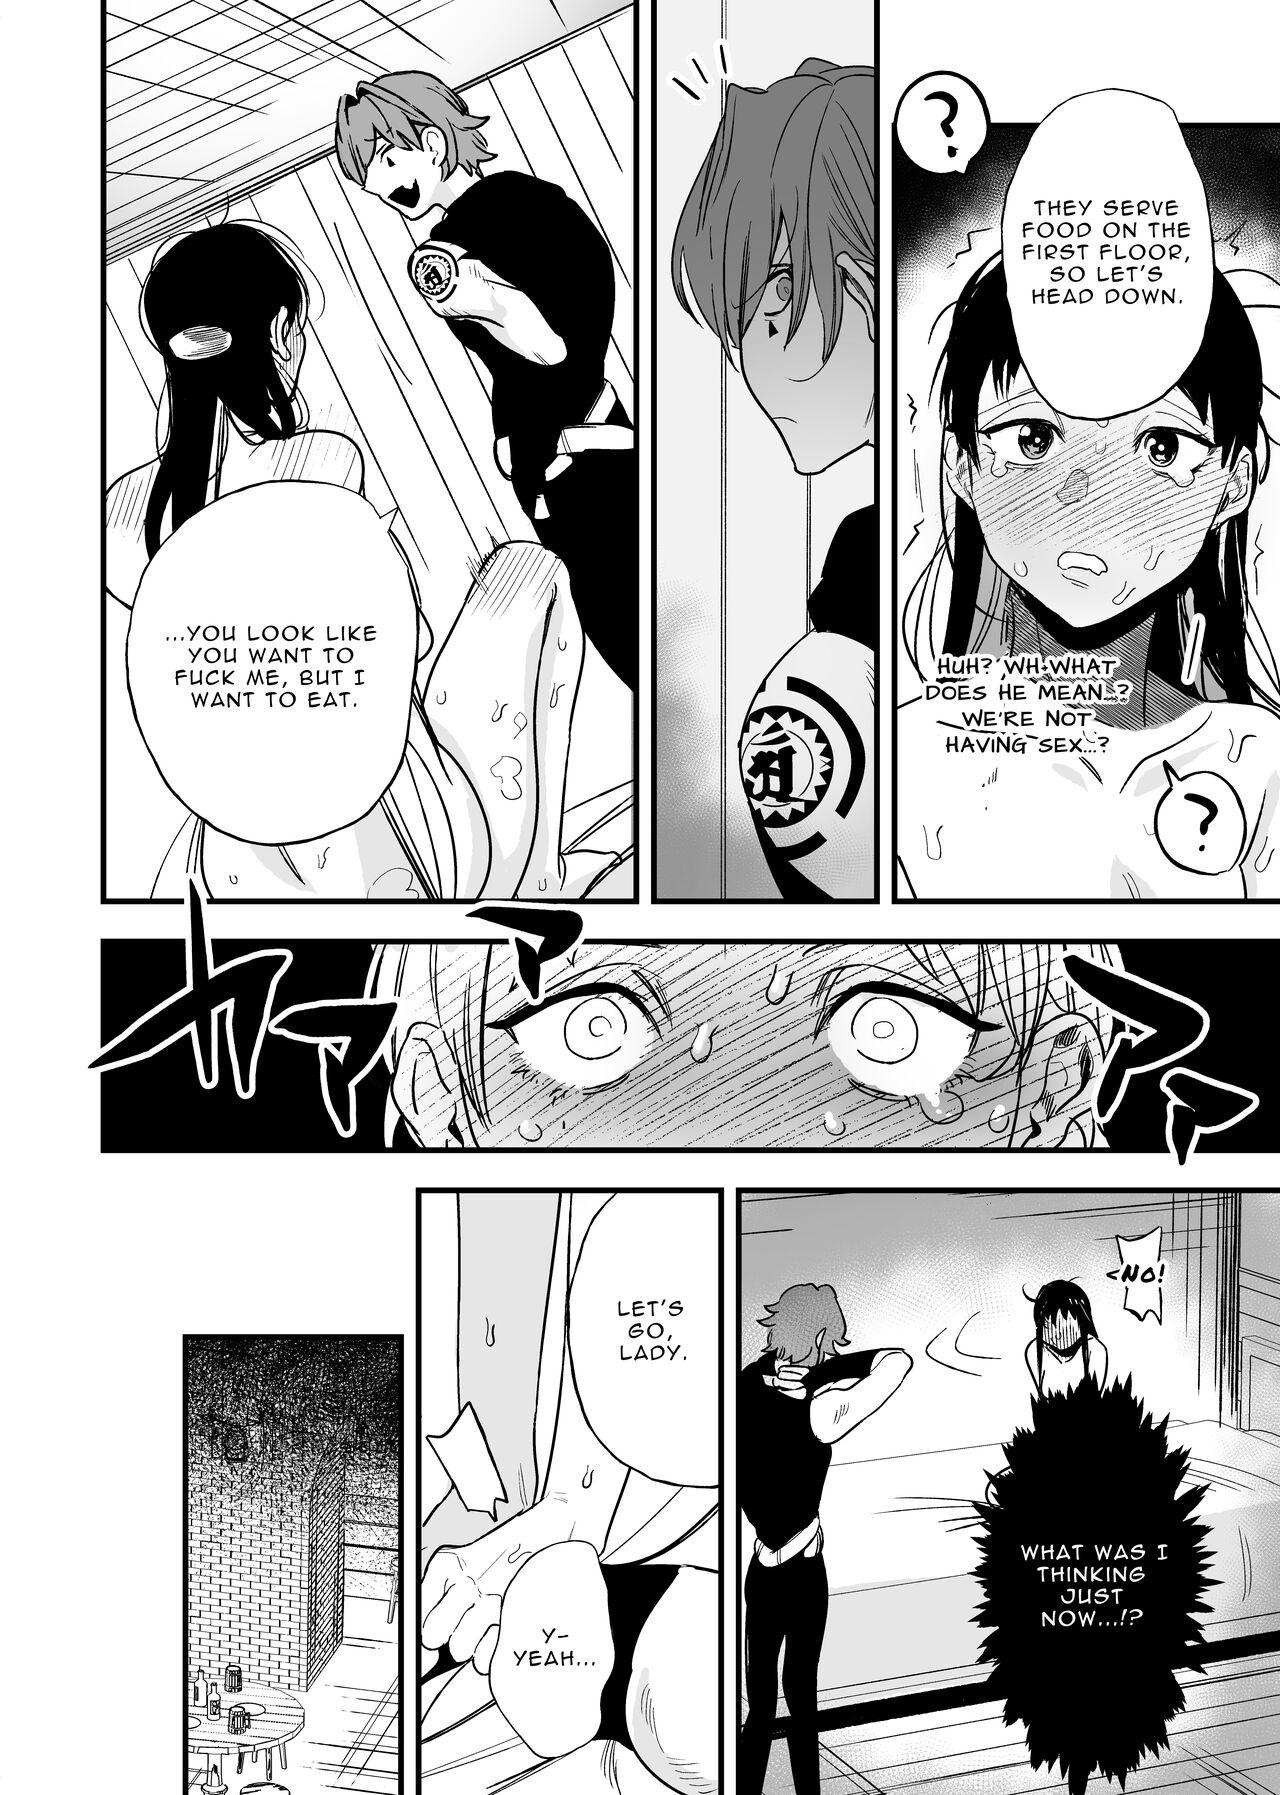 Naked Sluts The Man Who Saved Me on my Isekai Trip was a Killer... 2 - Original Roludo - Page 12